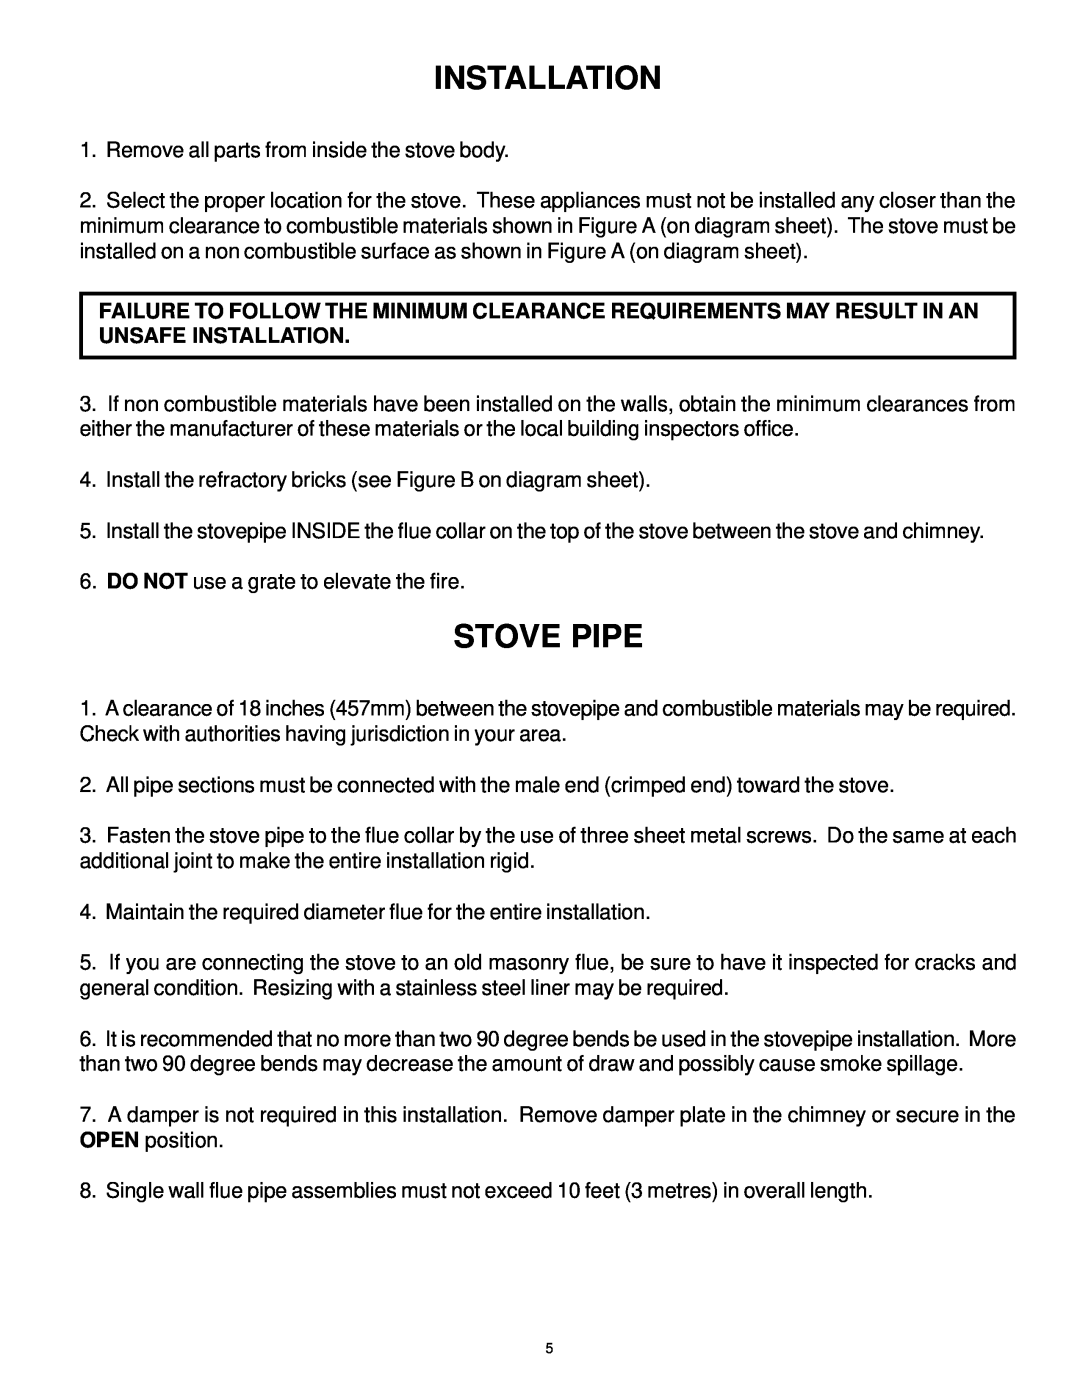 Vermont Casting WOOD STOVE owner manual Installation, Stove Pipe 